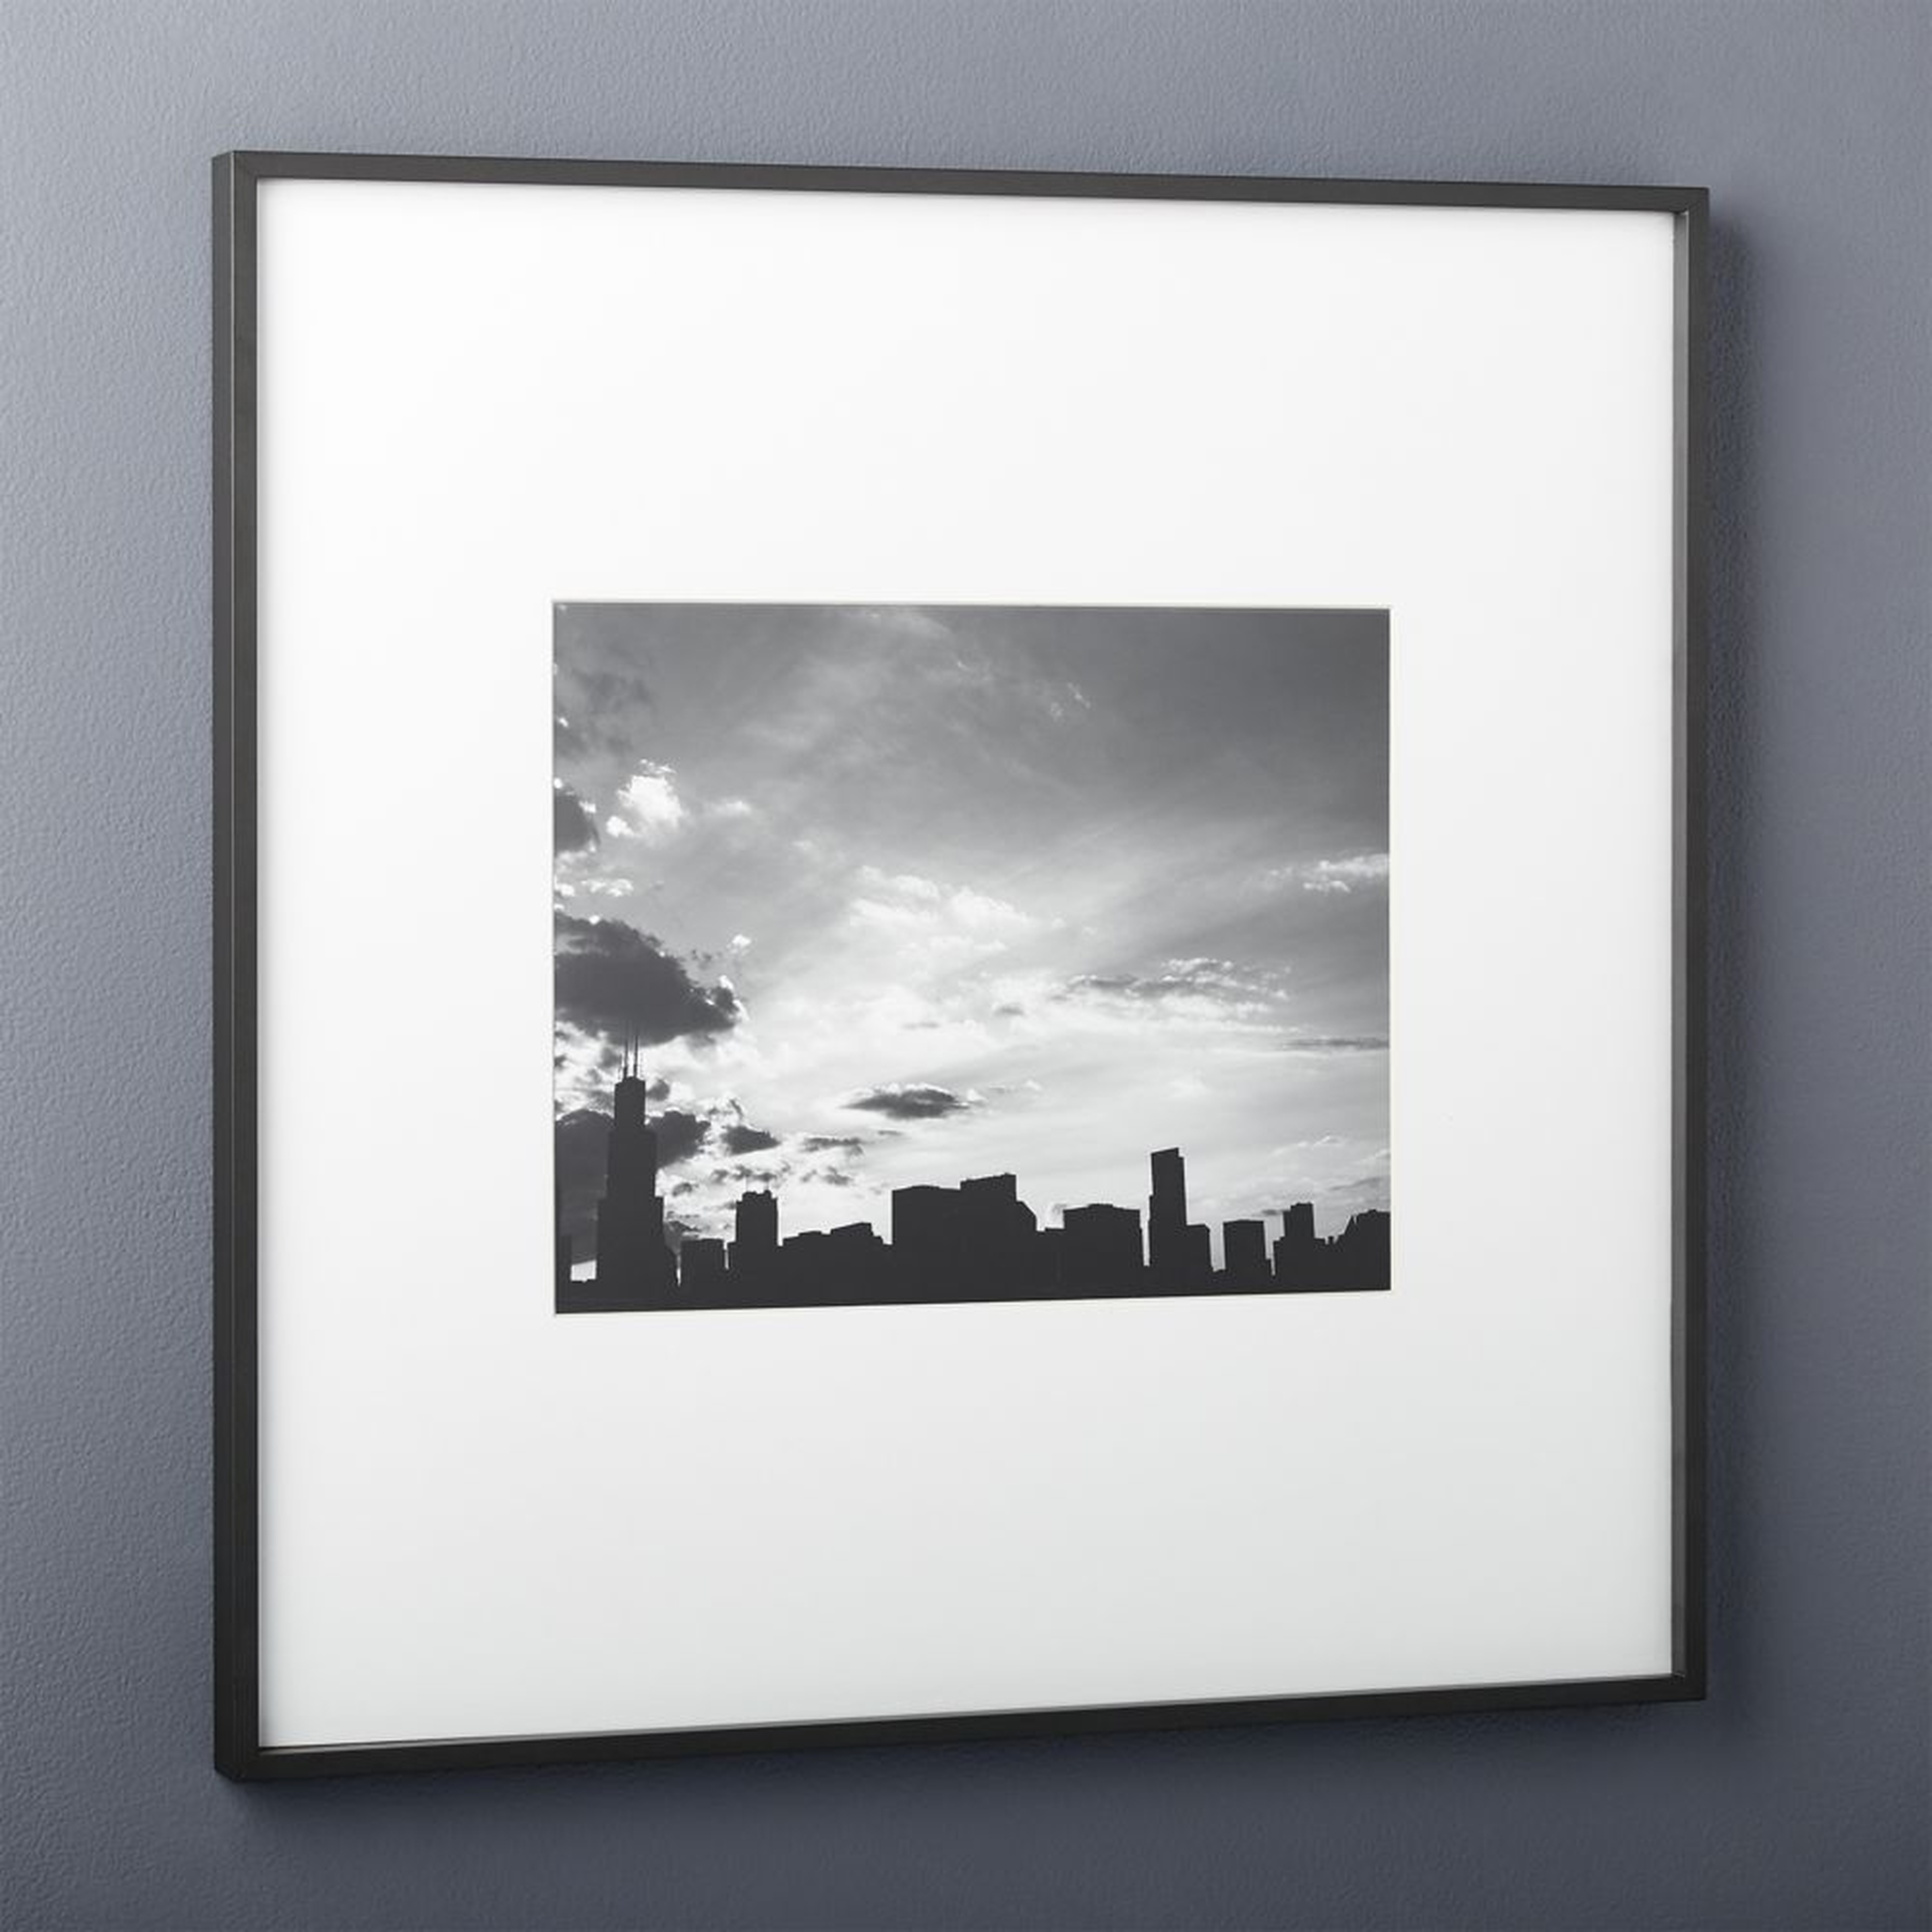 Gallery Picture Frame, Black, 11" x 14" - CB2